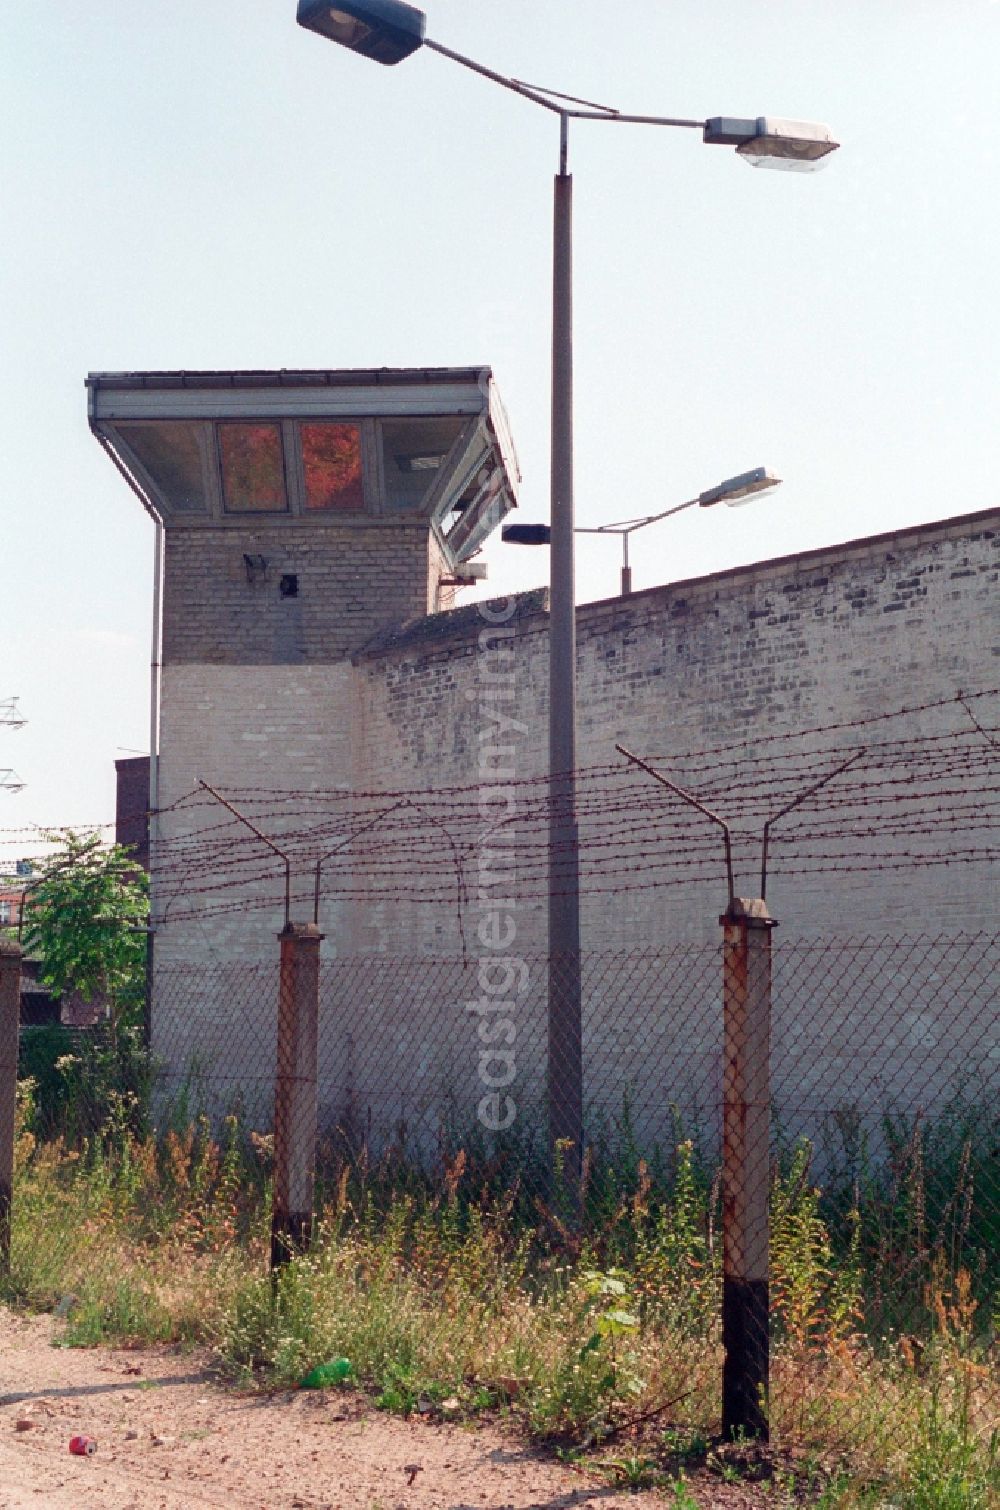 GDR picture archive: Berlin - Watchtower with barbed wire at the site of the former prison Rummelsburg in Berlin, the former capital of the GDR, German Democratic Republic. The facility was used as a detention facility in the police. It offered space for up to 90